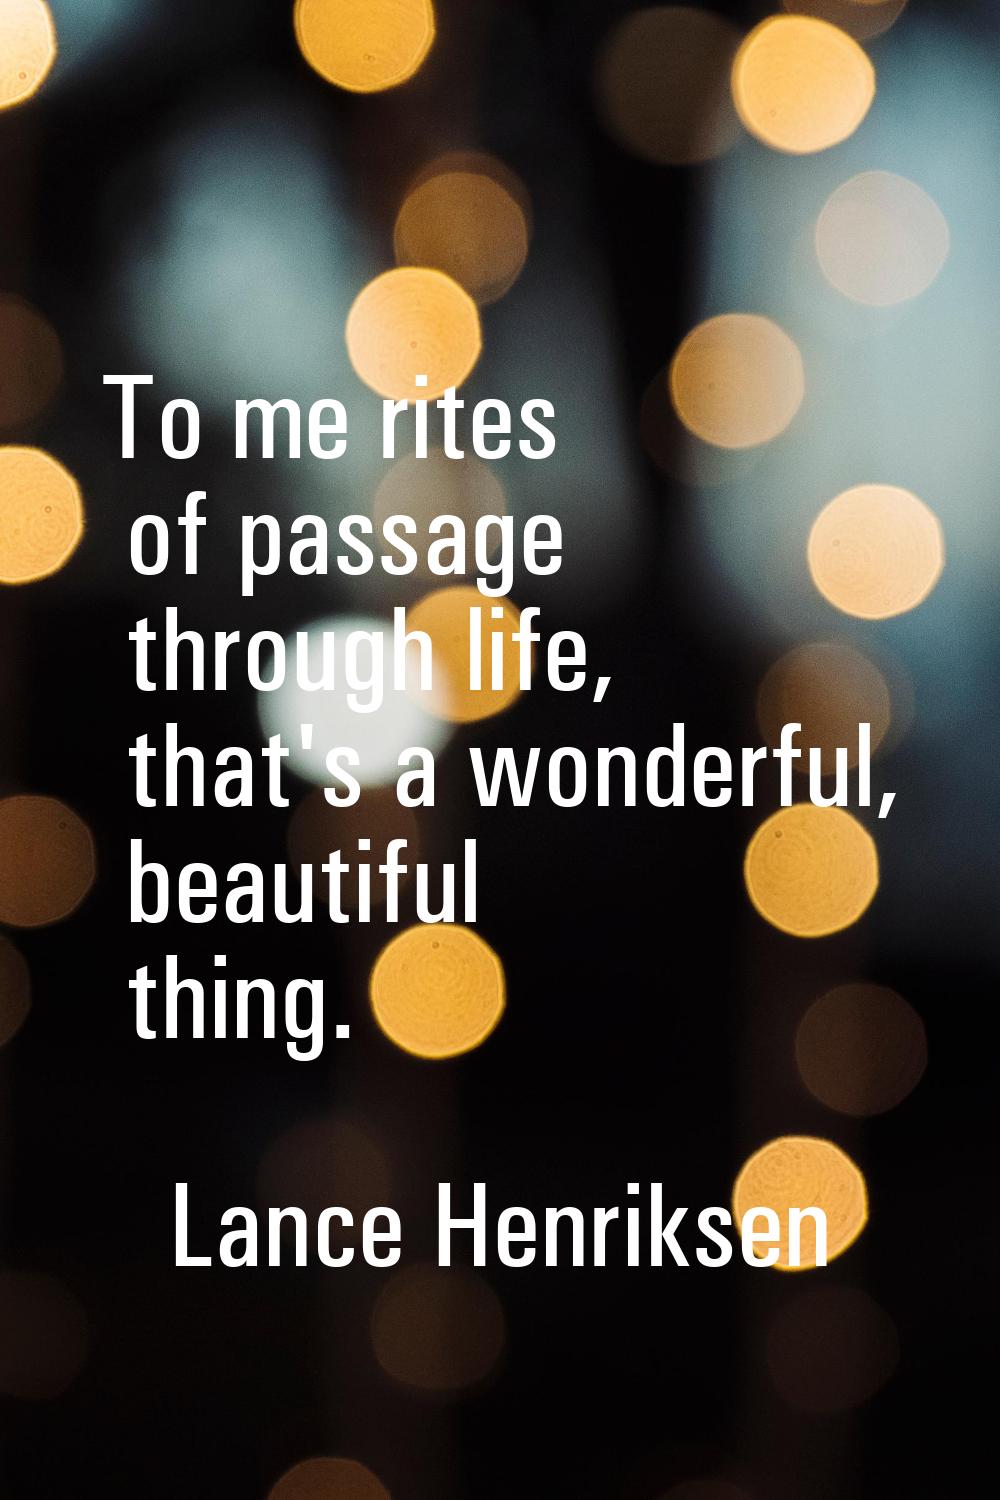 To me rites of passage through life, that's a wonderful, beautiful thing.